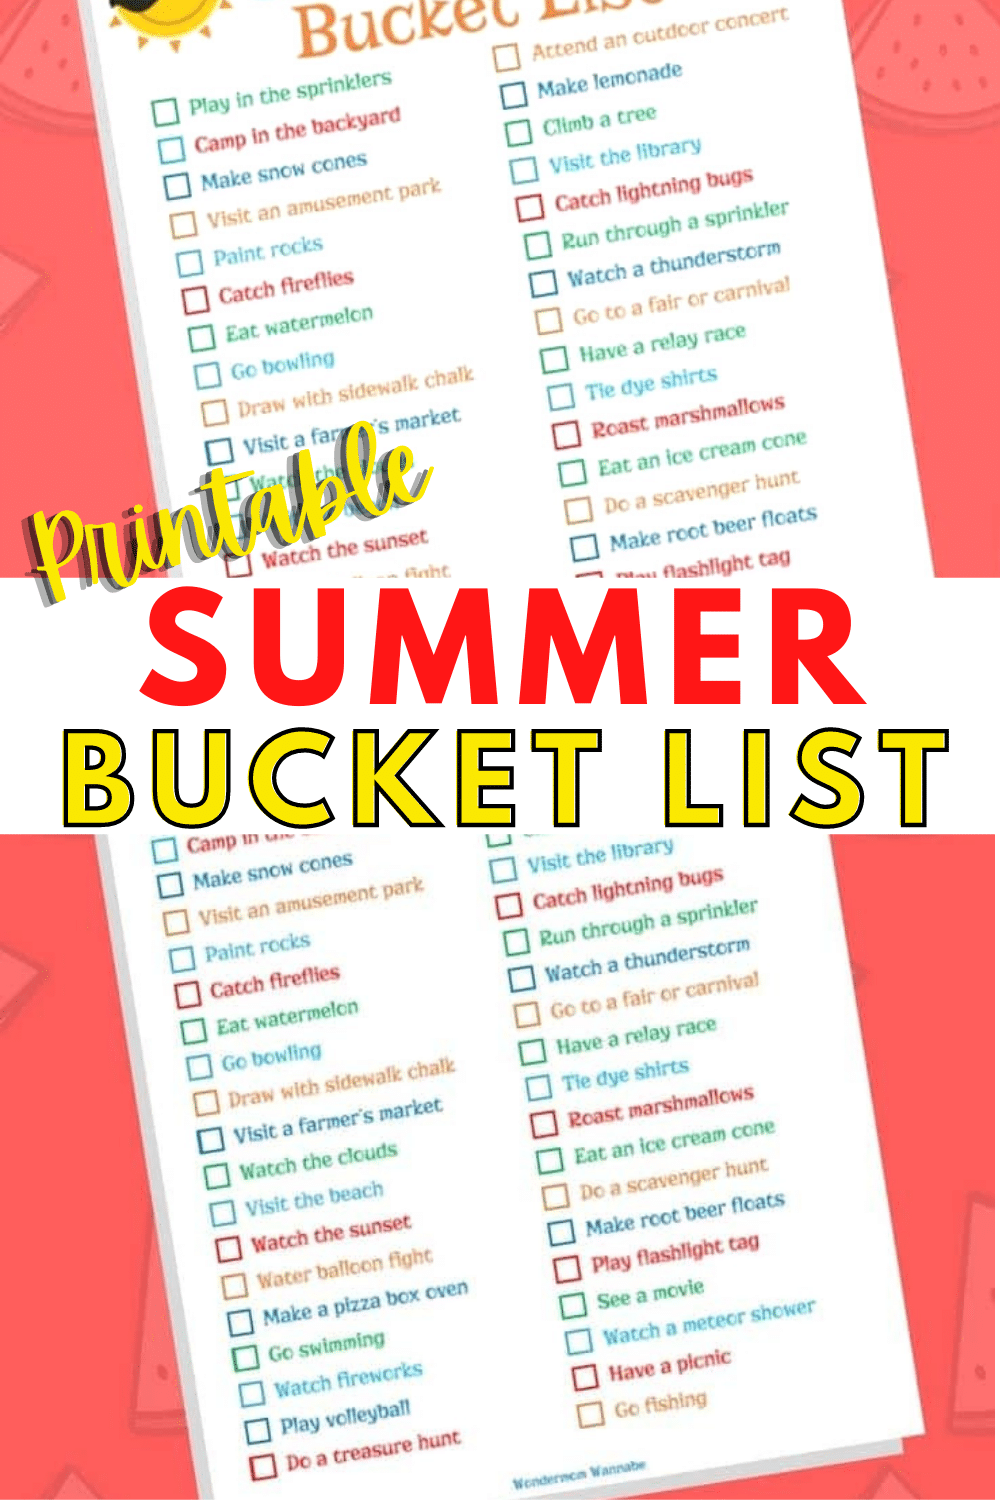 This printable summer bucket list is full of fun activities and ideas to make summer fun and memorable. Great combination of things to do at home and away. #printables #freeprintables #bucketlist #summer #familyprintables via @wondermomwannab